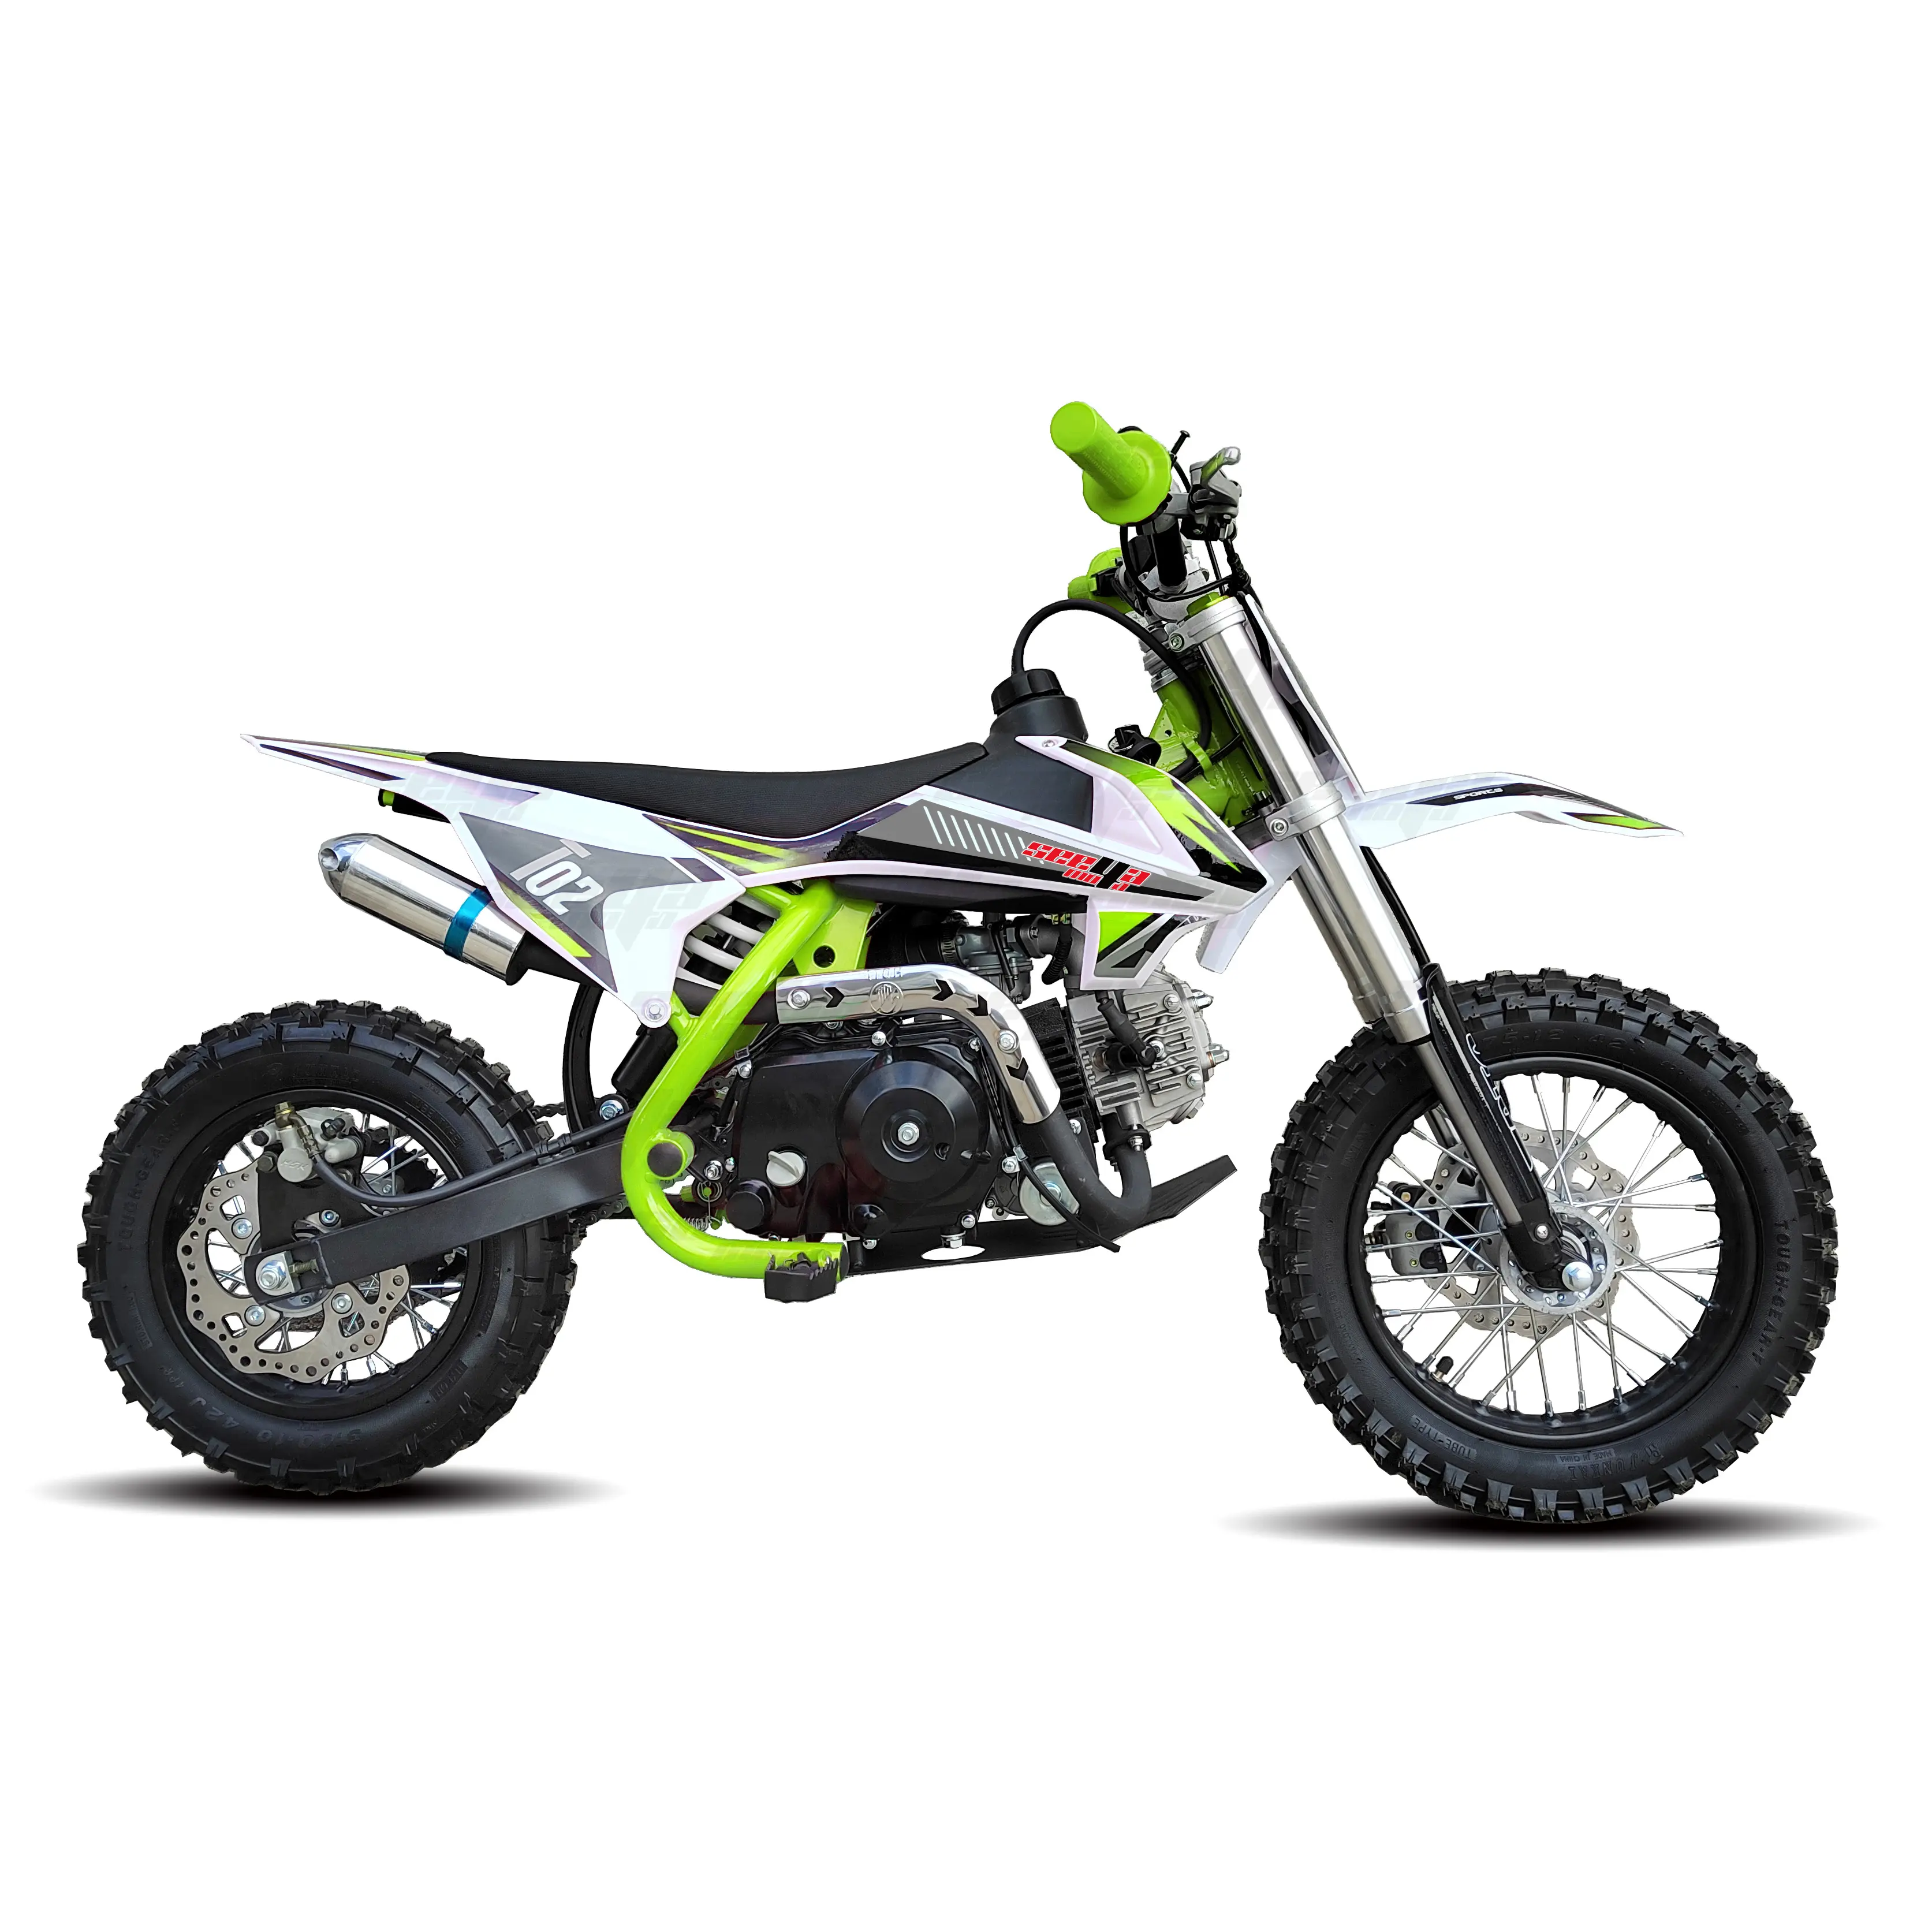 New Green 110cc 4 stroke off road fully automatic pit bike kids dirt bike cross motorcycle T02 with CE